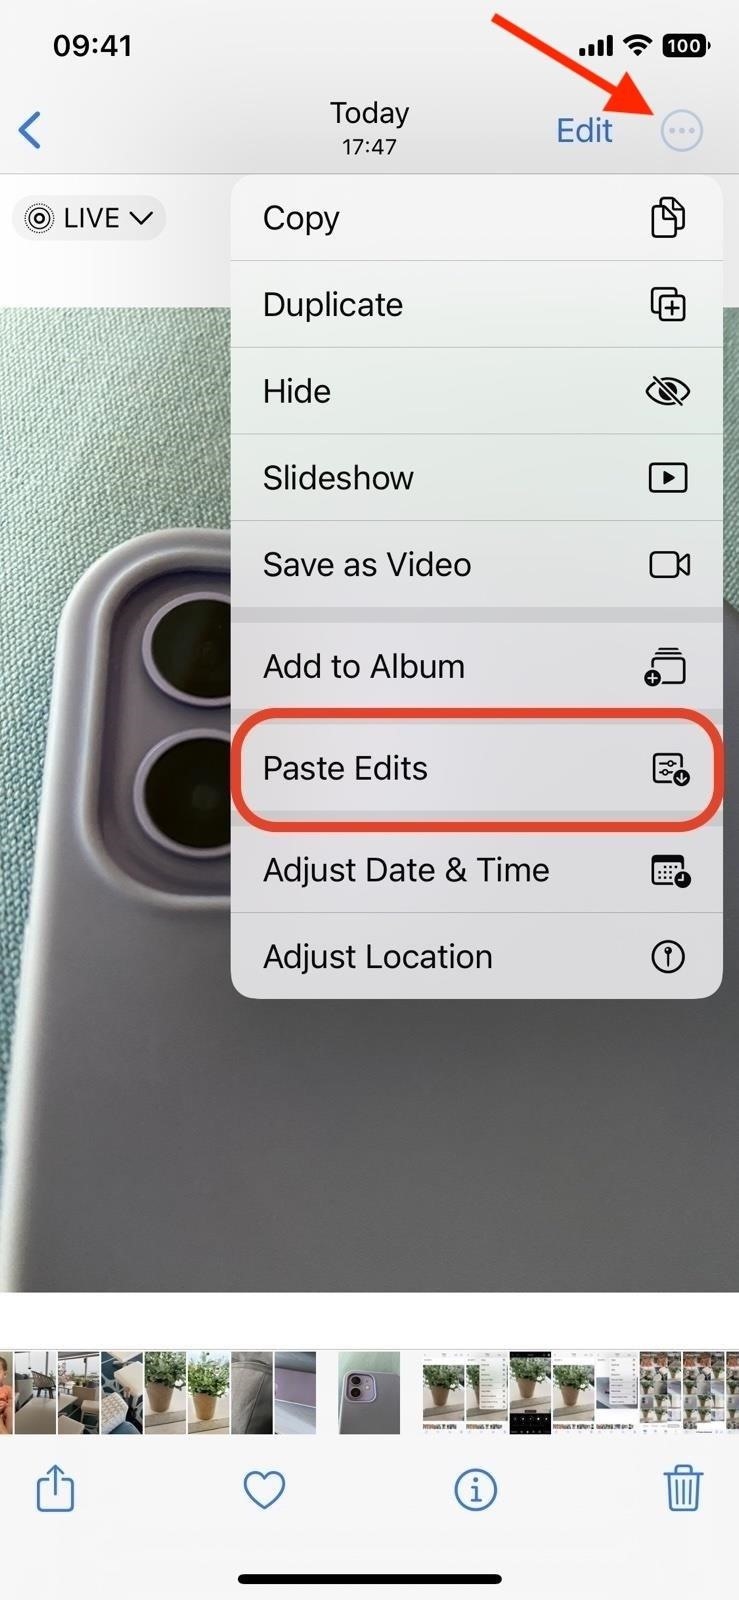 Batch Editing Photos and Videos on Your iPhone Just Got Way Easier